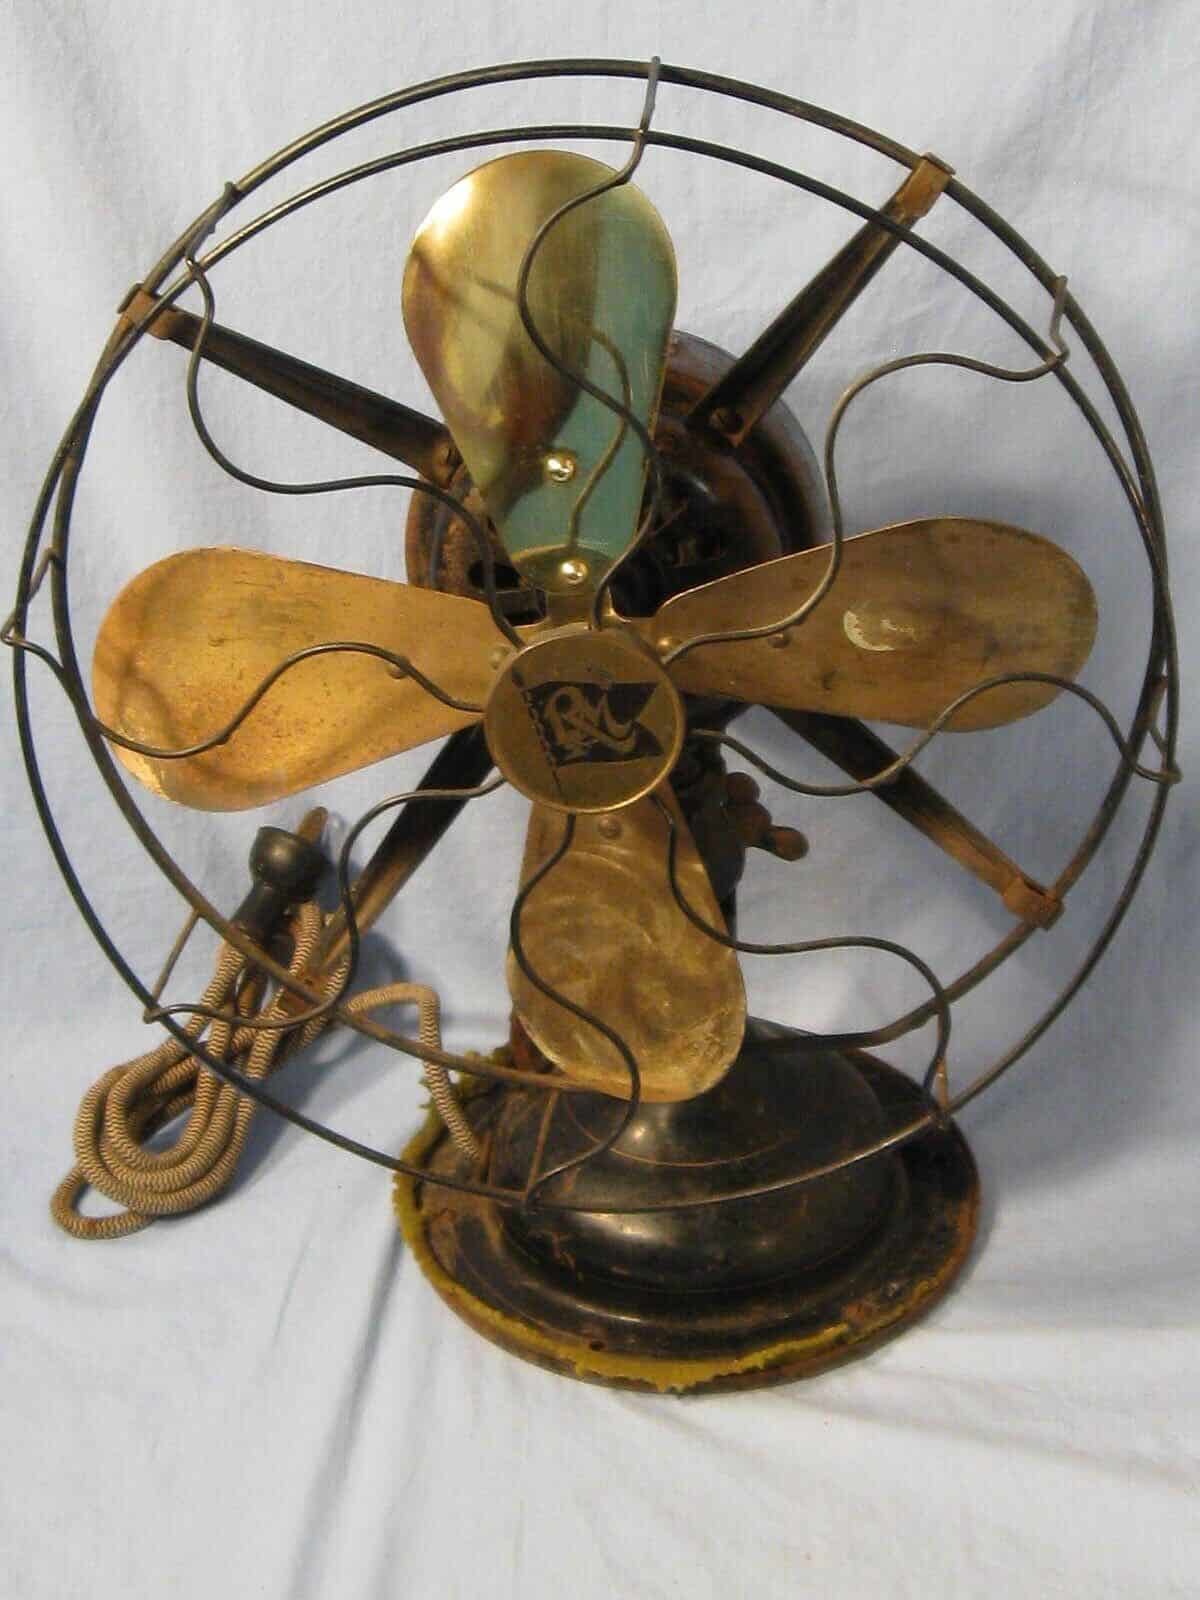 Robbins & Myers 2410 Brass Bladed Fan From Circa 1920s